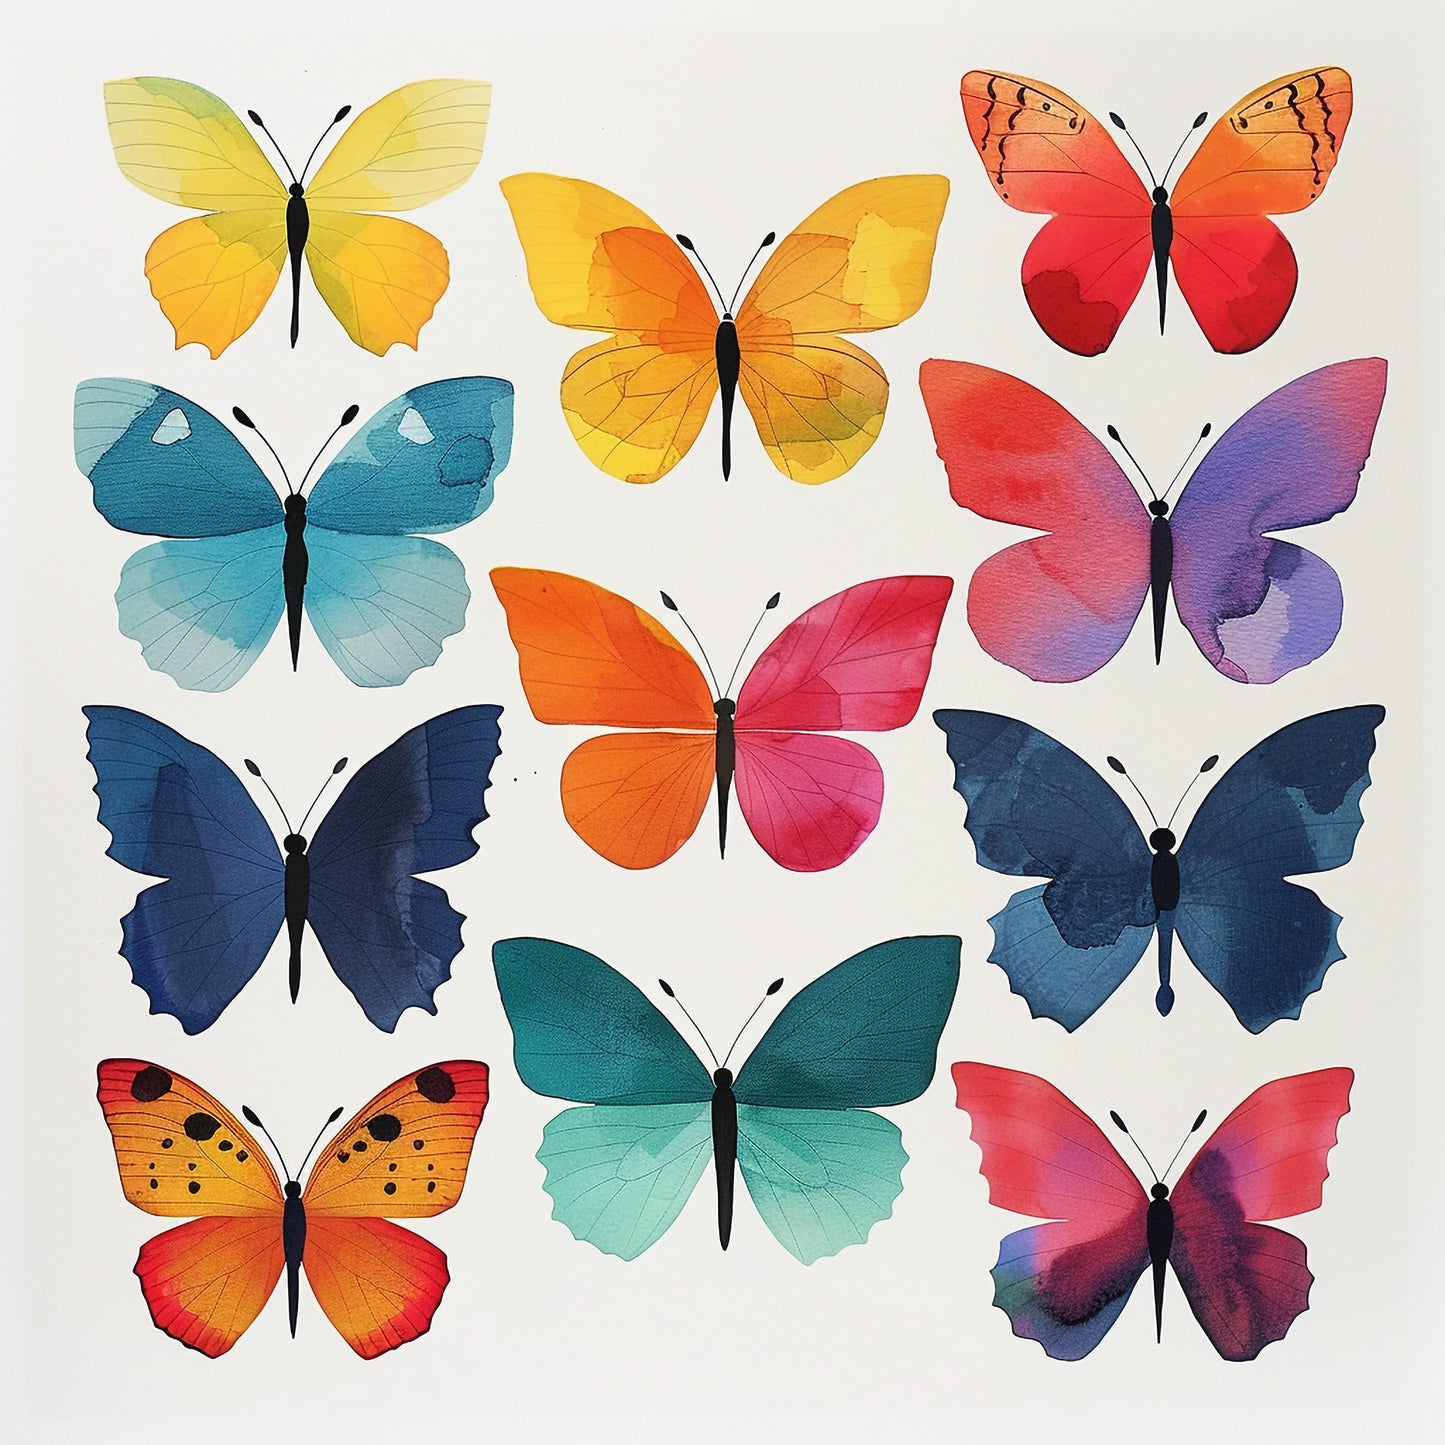 Colorful Watercolor Butterflies on White Background